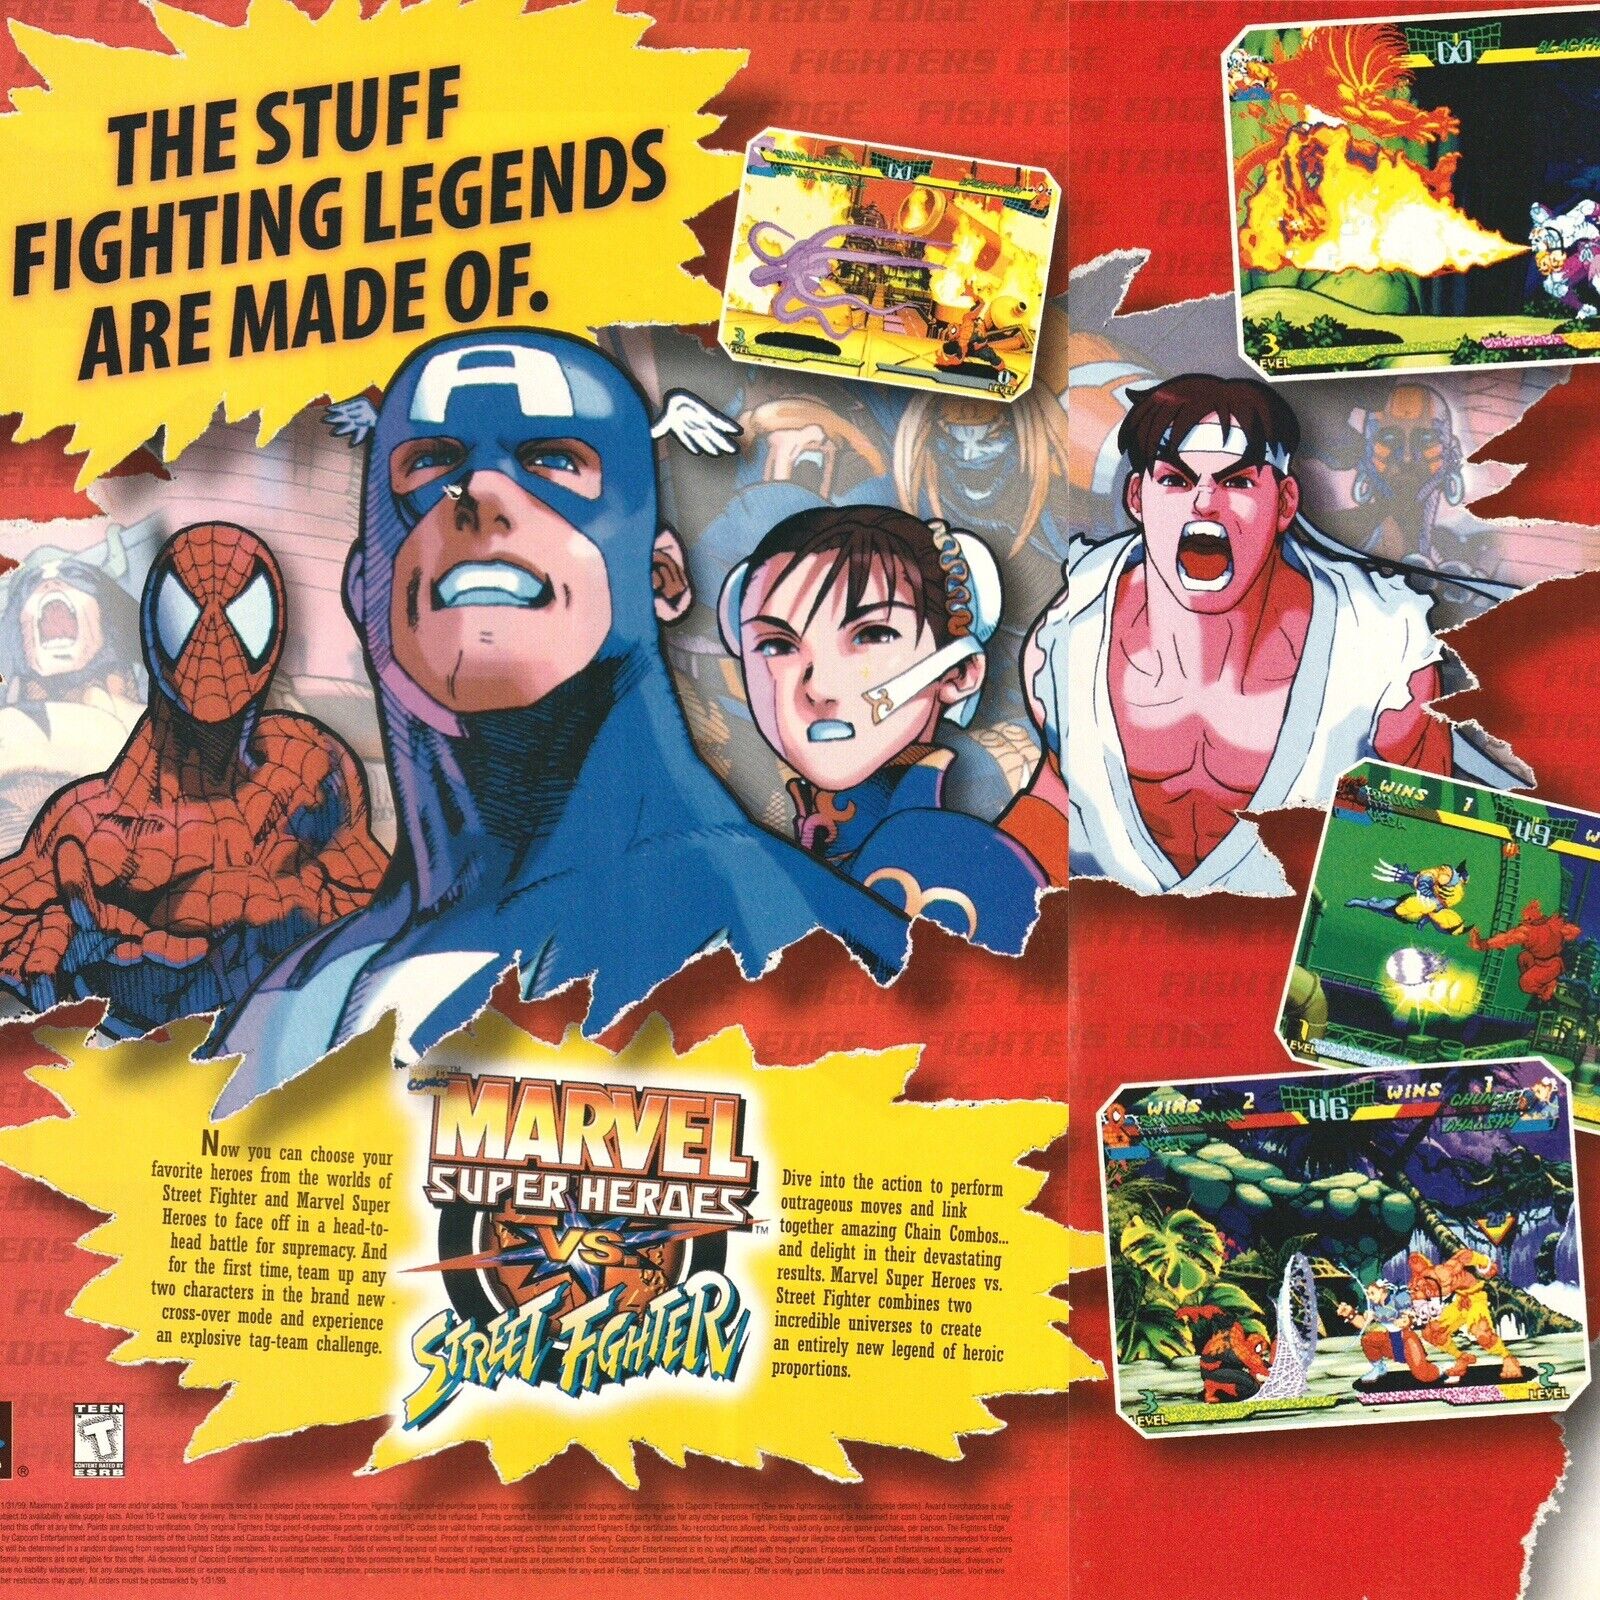 1999 Marvel Super Heroes Vs Street Fighter 2-Pg Print Ad/Poster 42x27cm GPM 125